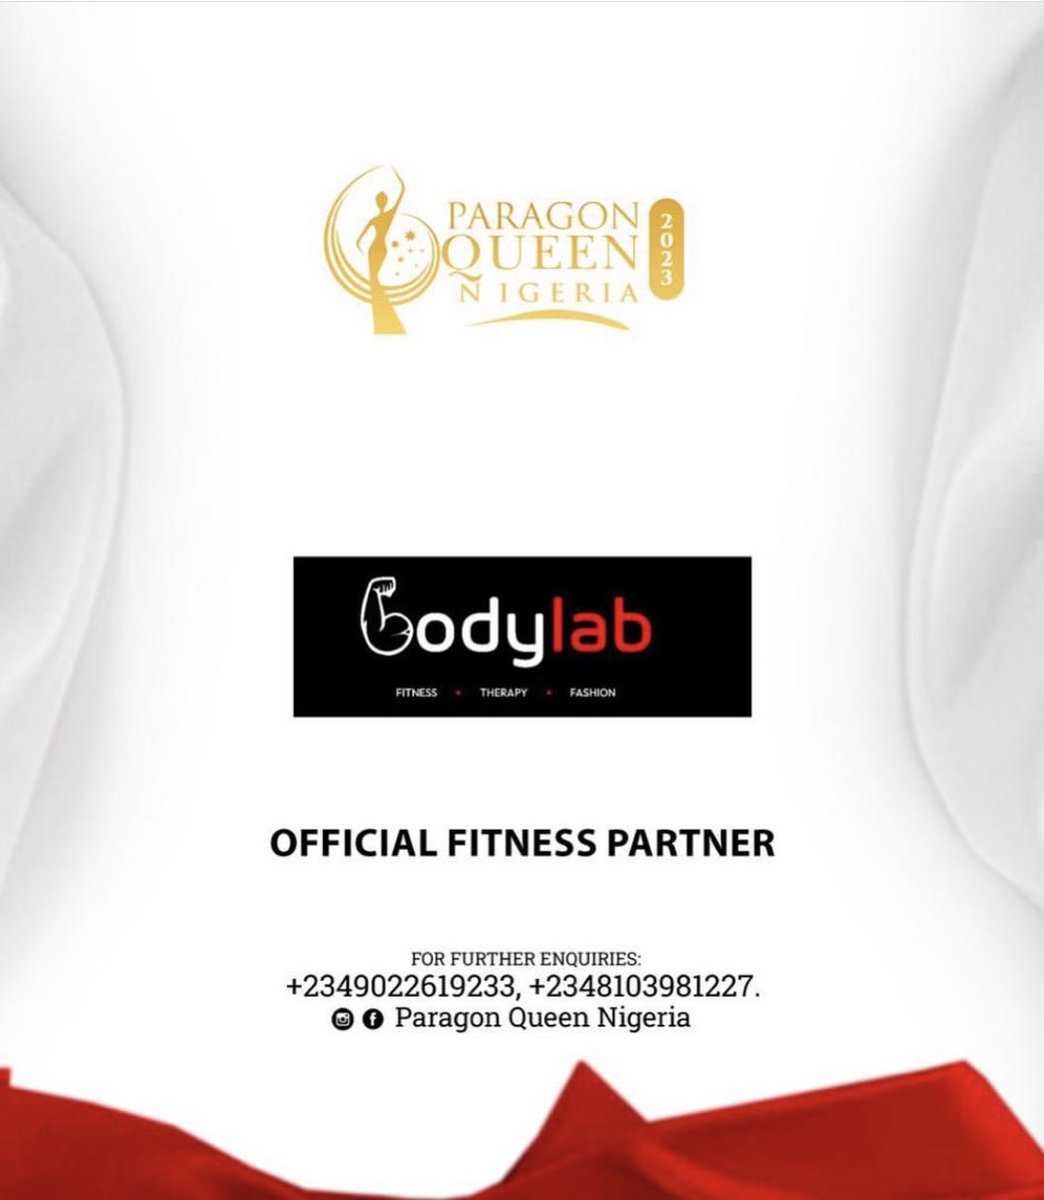 Kudos to our King👏🥰
What we love to see🤭
Congratulations Bodylab😊

#EmmanuelUmoh